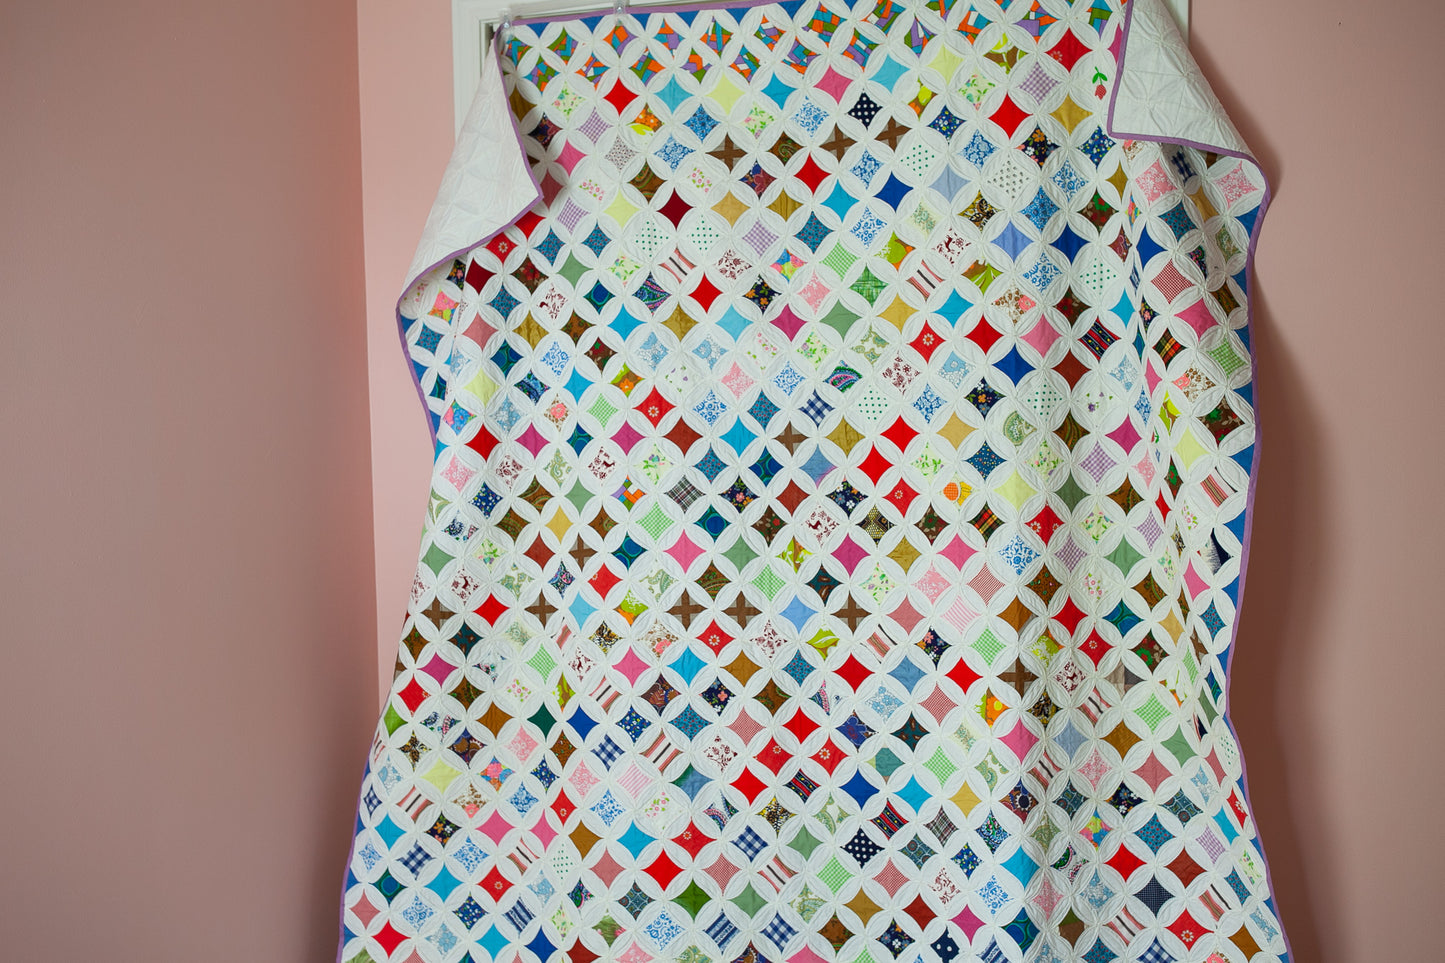 Vintage Cathedral Window Quilt - Colorful Quilt - Quilt